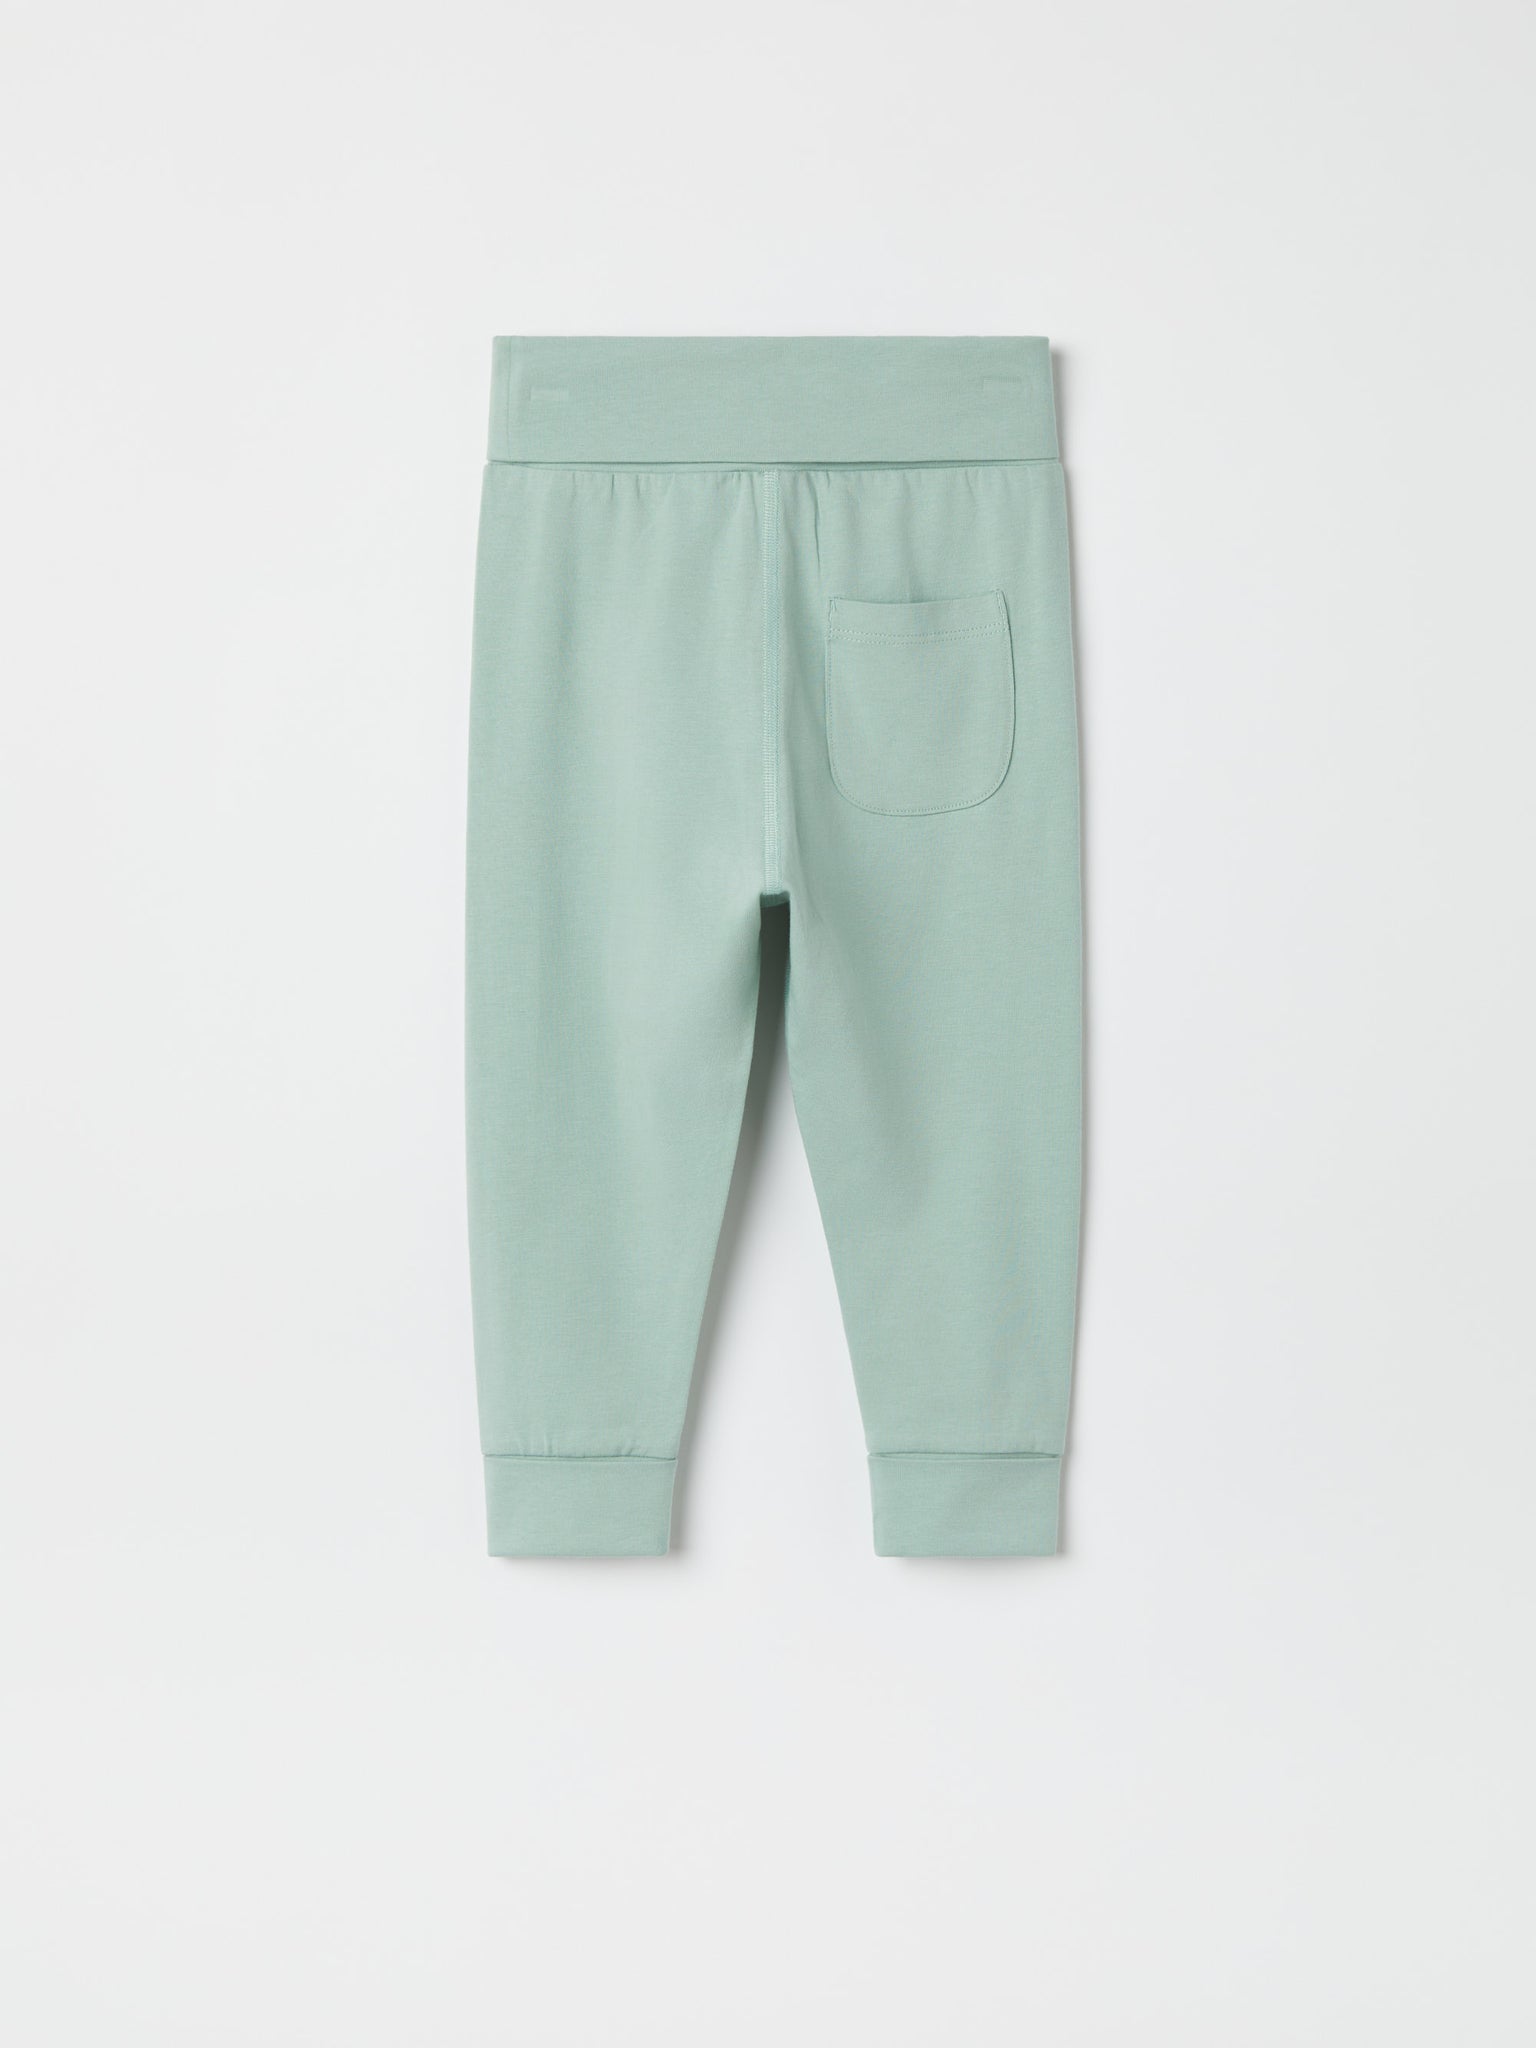 Green Organic Cotton Baby Leggings from the Polarn O. Pyret baby collection. Nordic kids clothes made from sustainable sources.